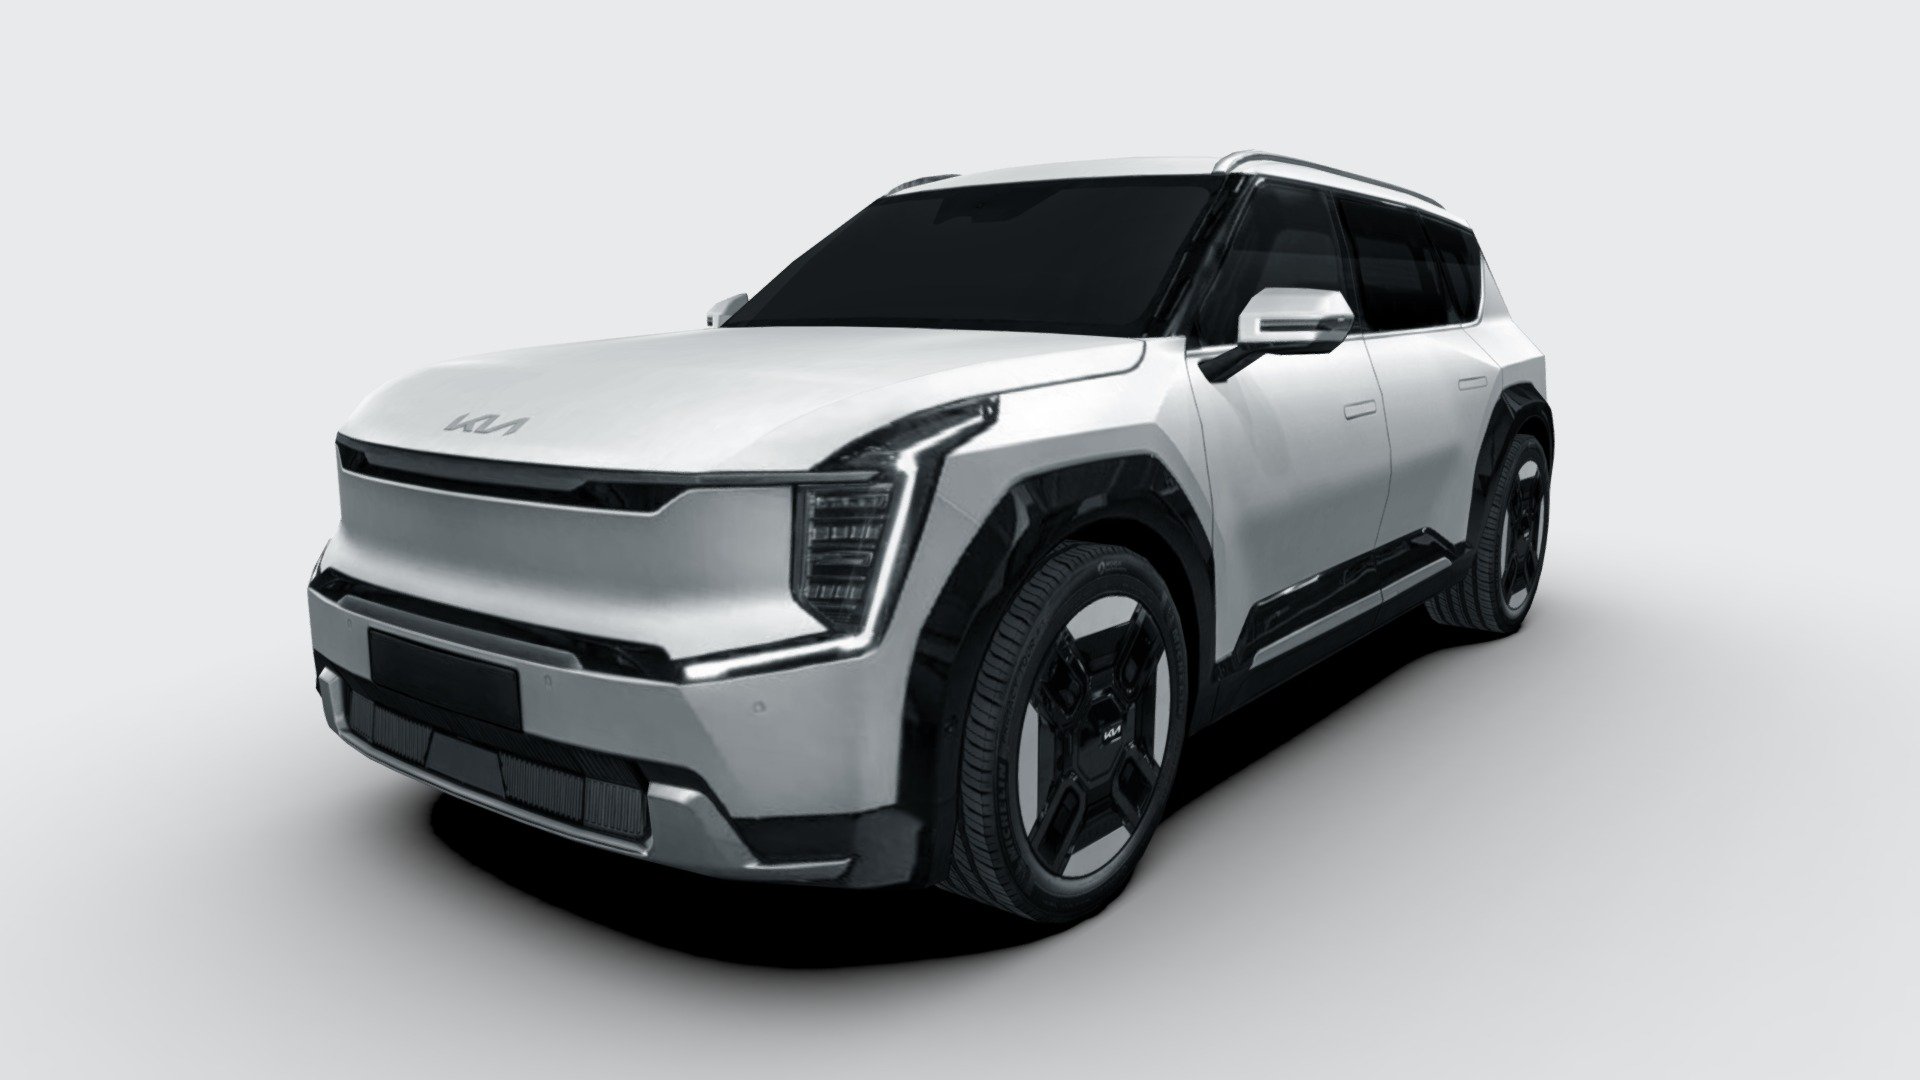 3d model of the 2024 Kia EV9, an all-electric mid-size crossover SUV

The model is very low-poly, full-scale, real photos texture (single 2048 x 2048 png).

Package includes 5 file formats and texture (3ds, fbx, dae, obj and skp)

Hope you enjoy it.

José Bronze - Kia EV9 2024 - Buy Royalty Free 3D model by Jose Bronze (@pinceladas3d) 3d model